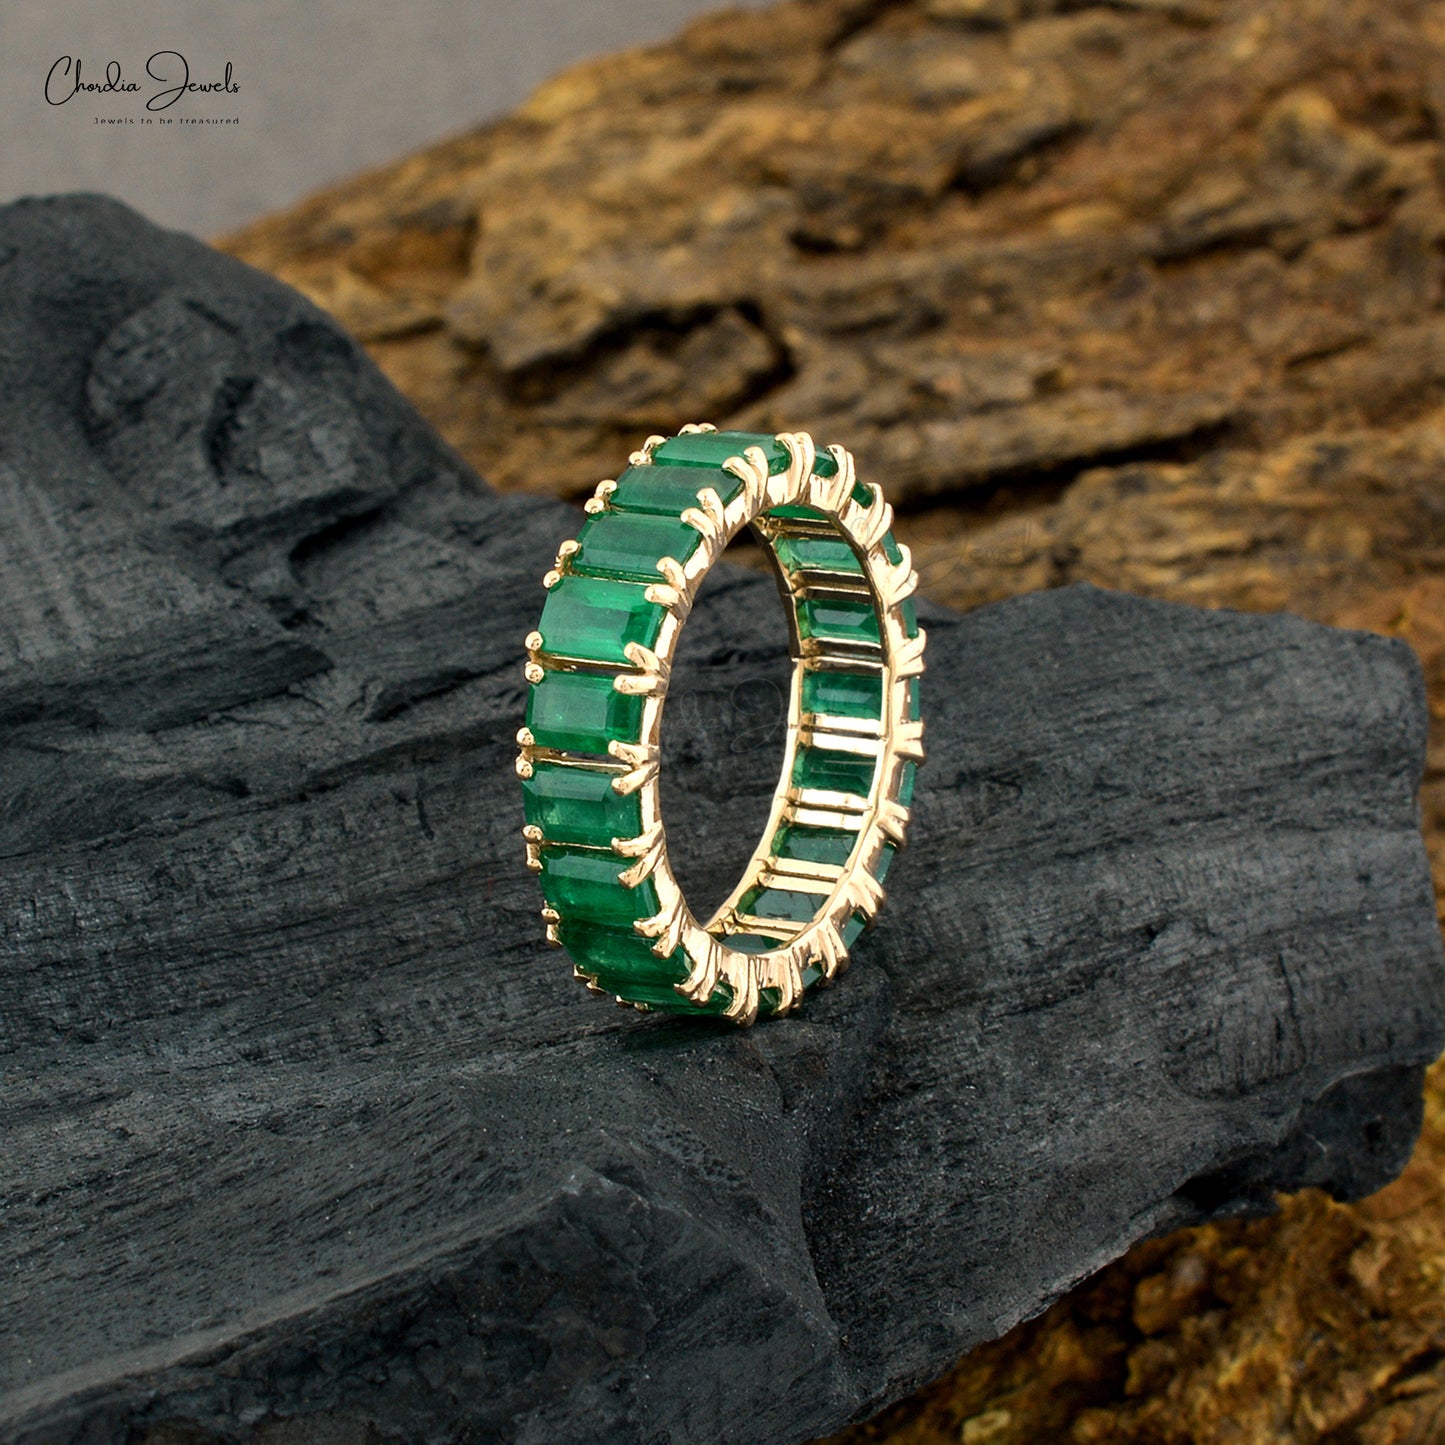 Transform your style with this emerald eternity ring.